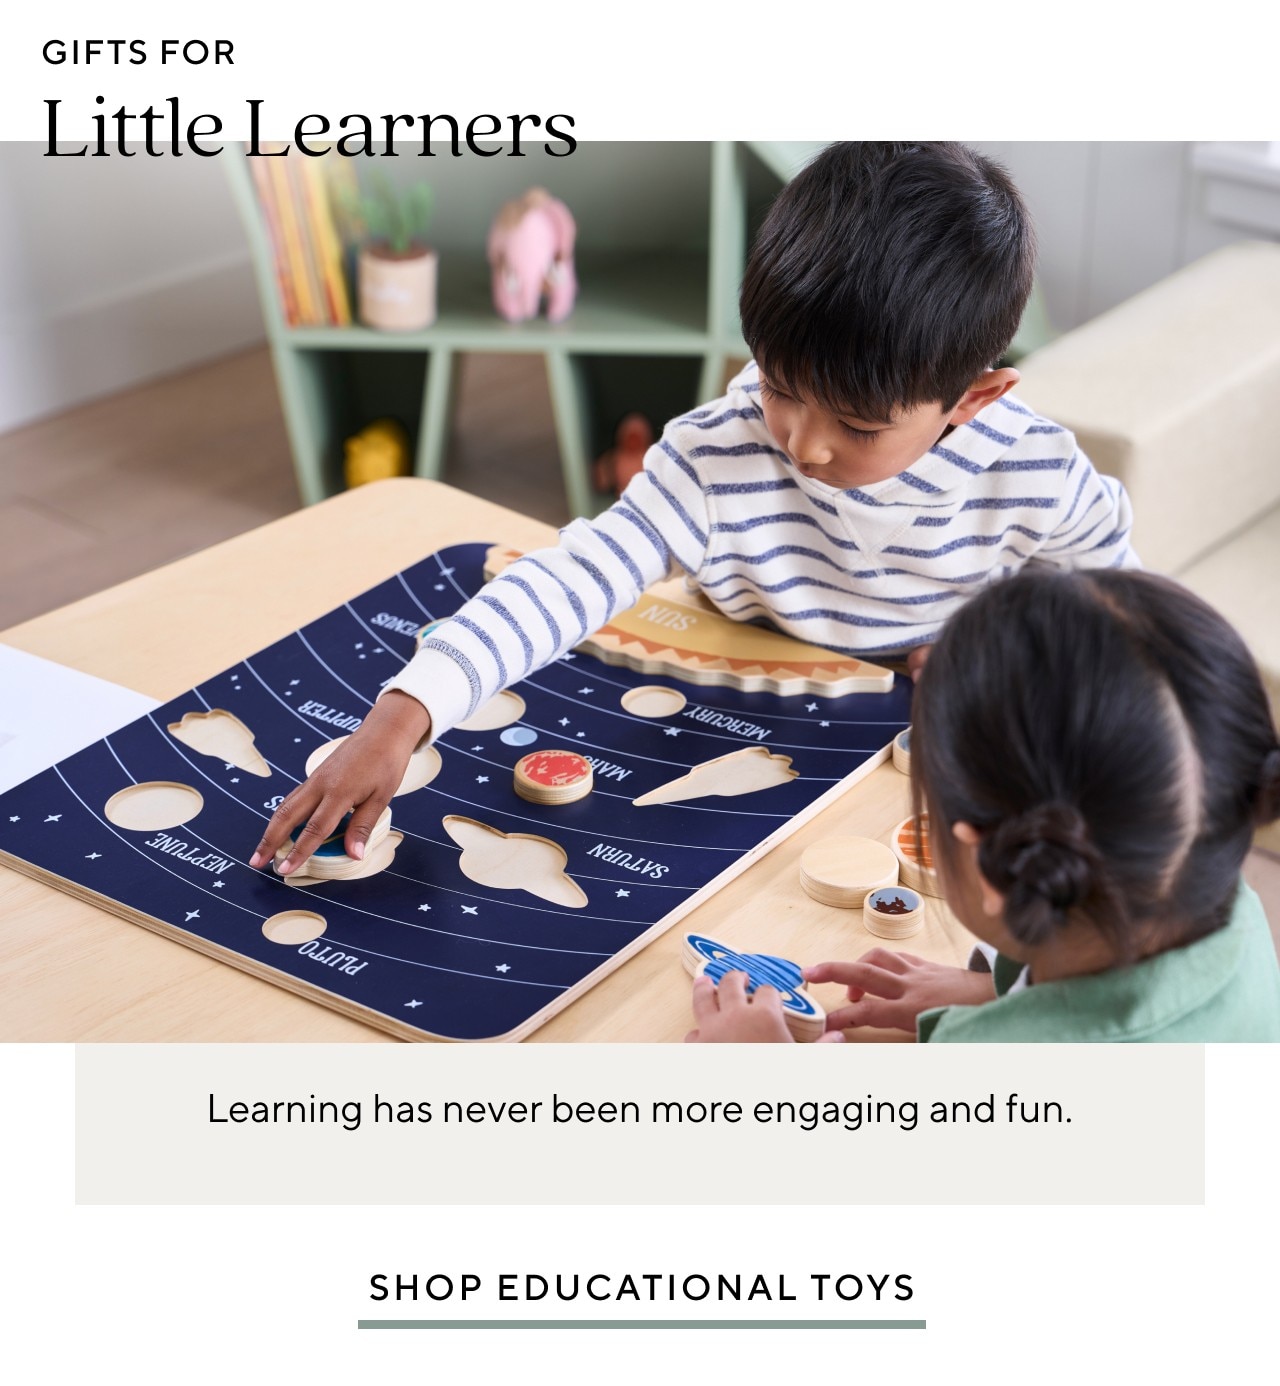 GIFTS FOR LITTLE LEARNERS